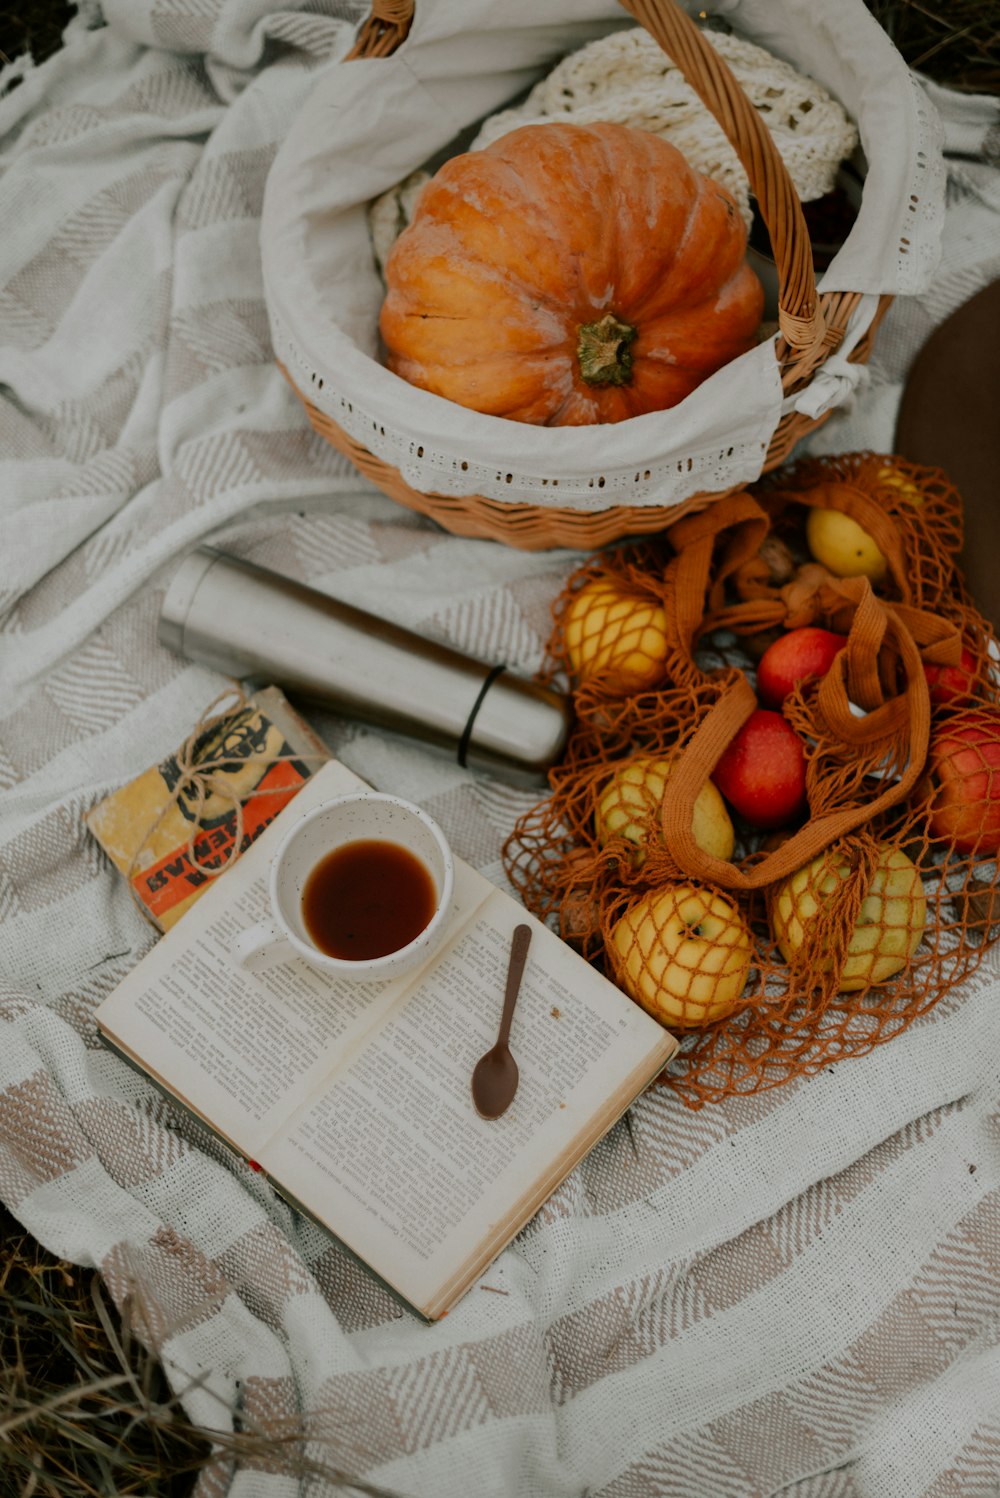 a basket of fruits and a book